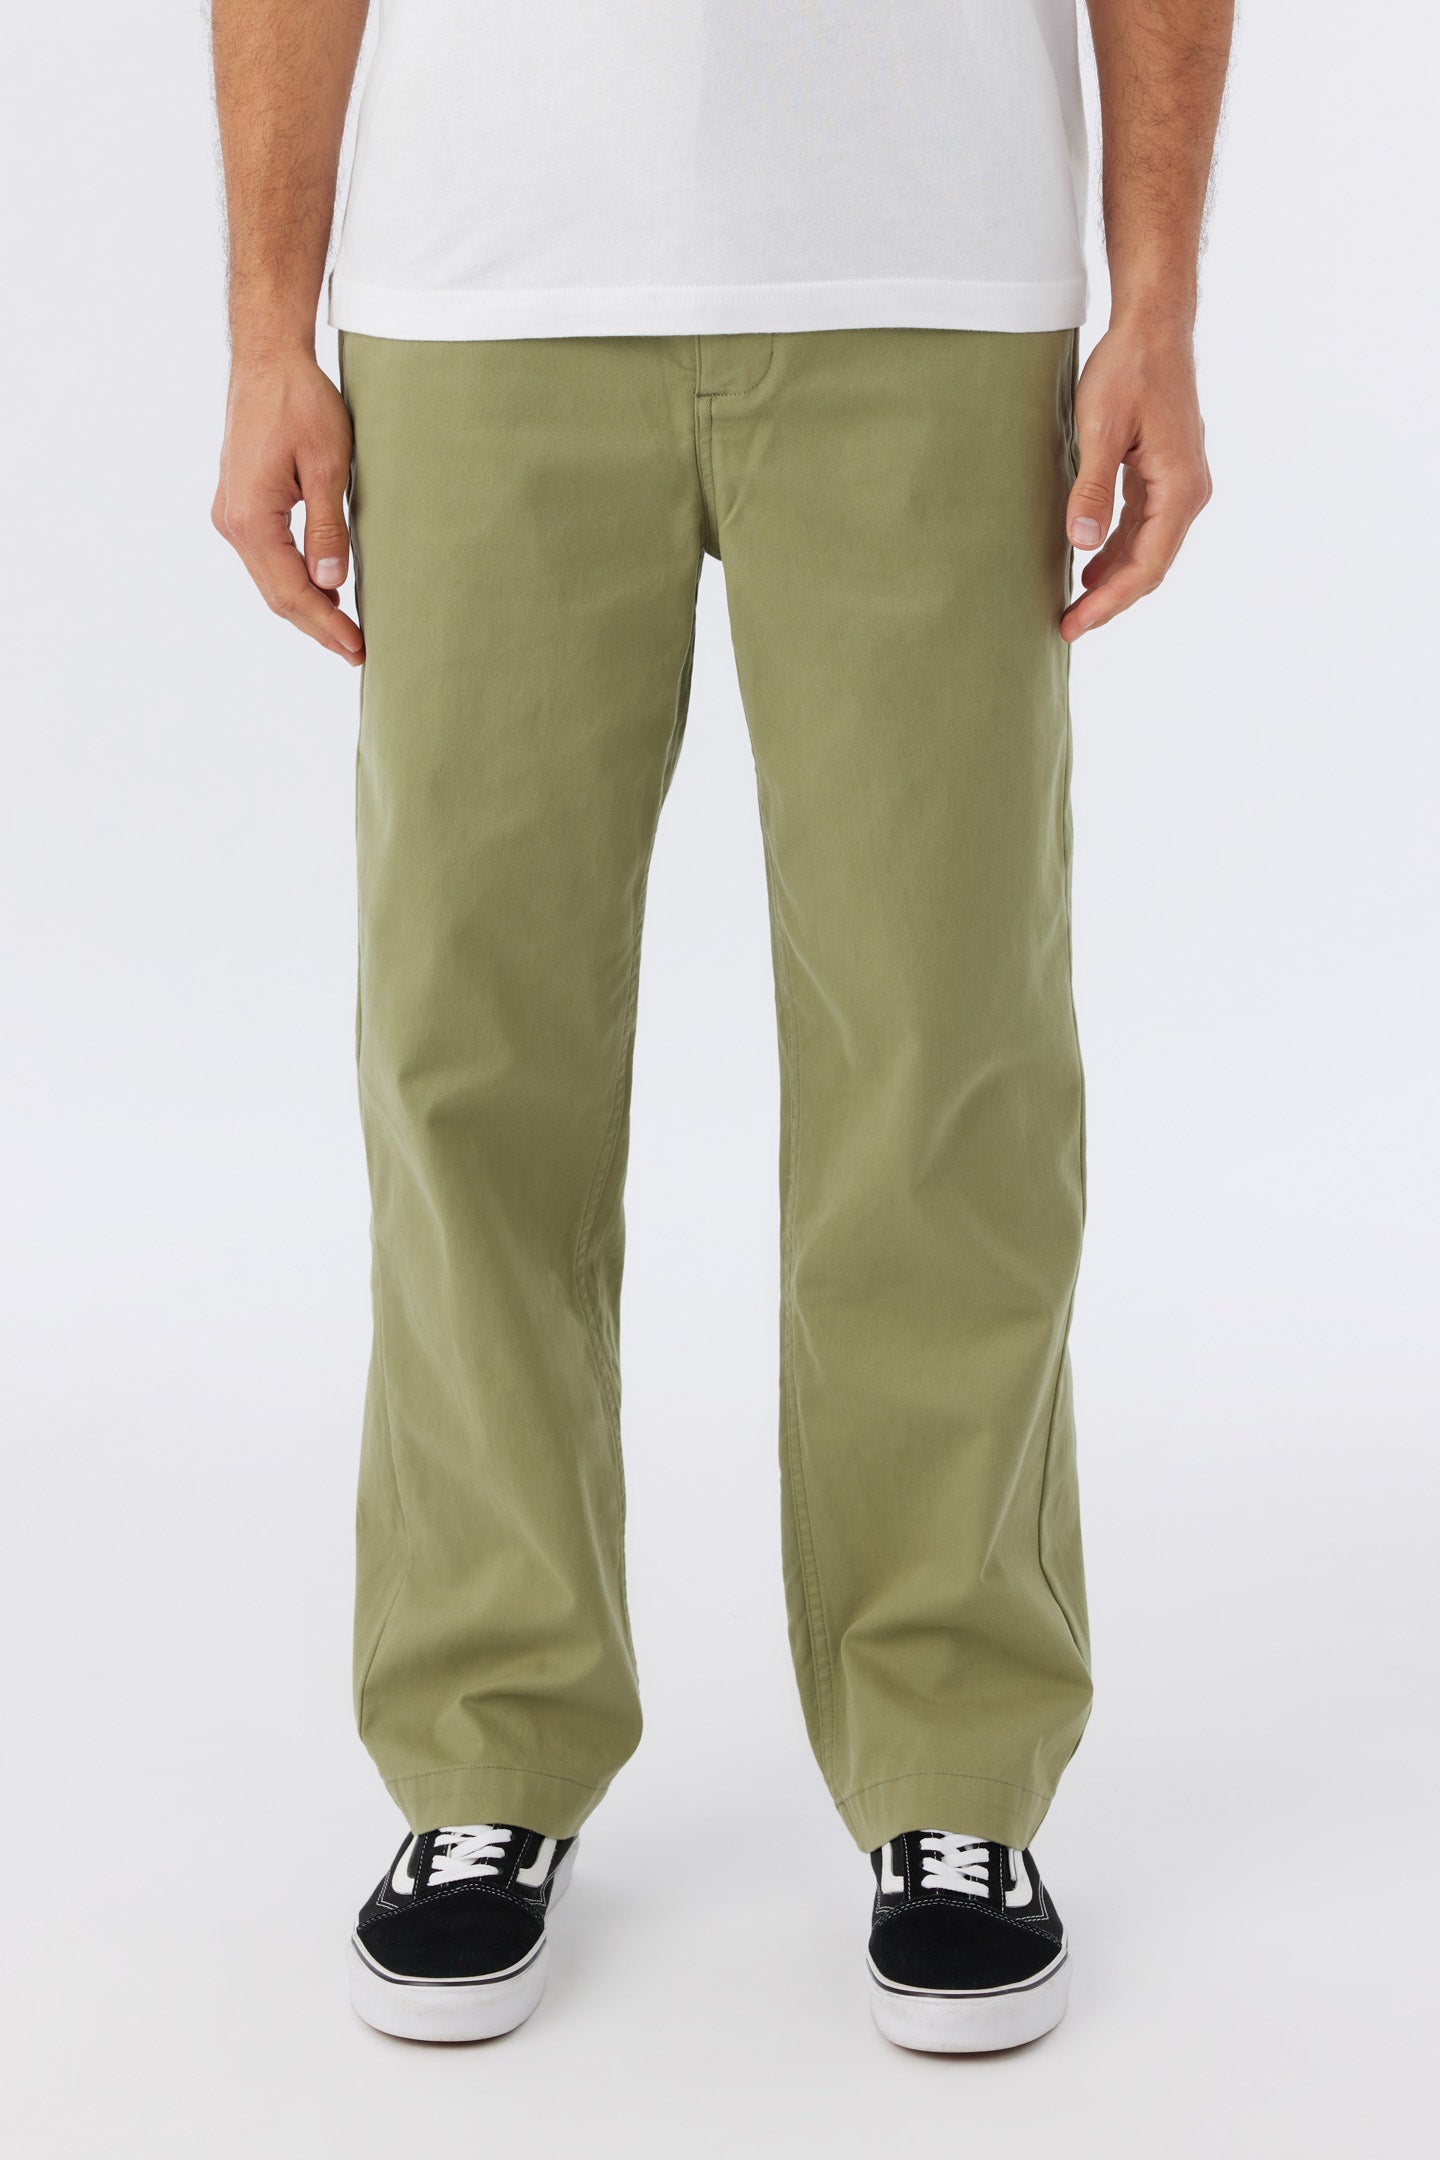 The Green Relaxed Pants